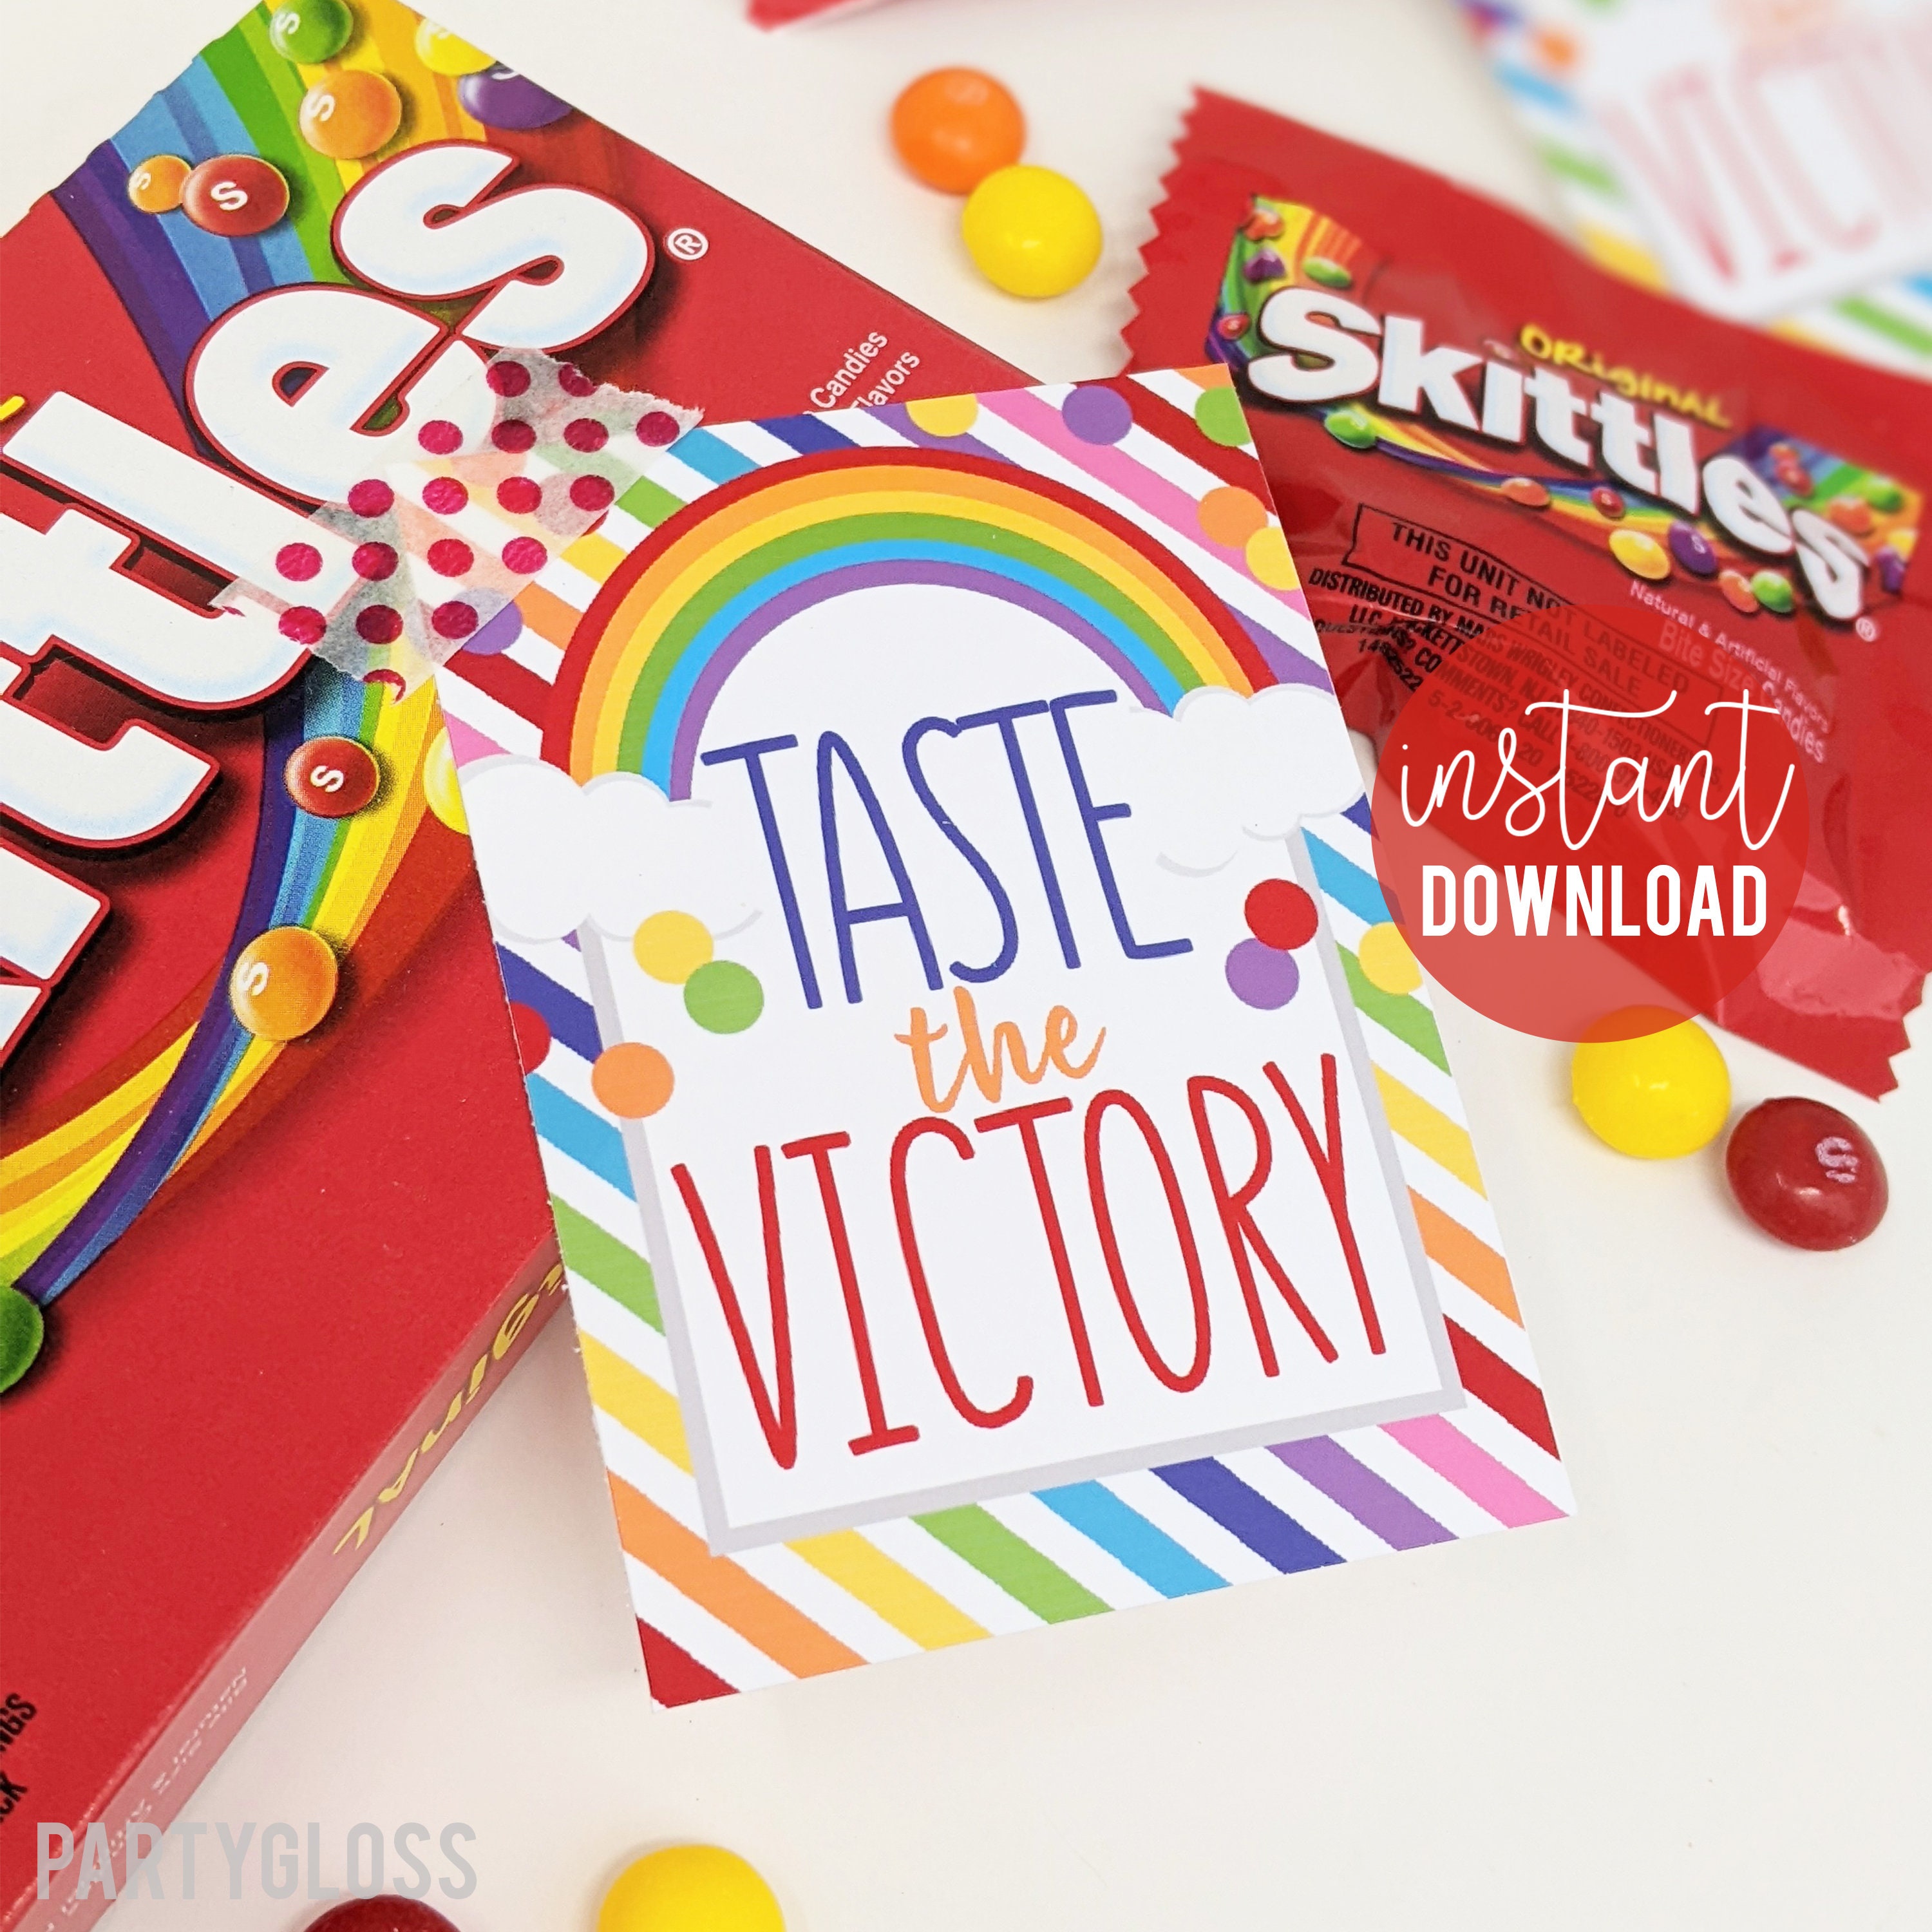 Kits Imprimibles Gratis Rainbow Friends Red candy bar